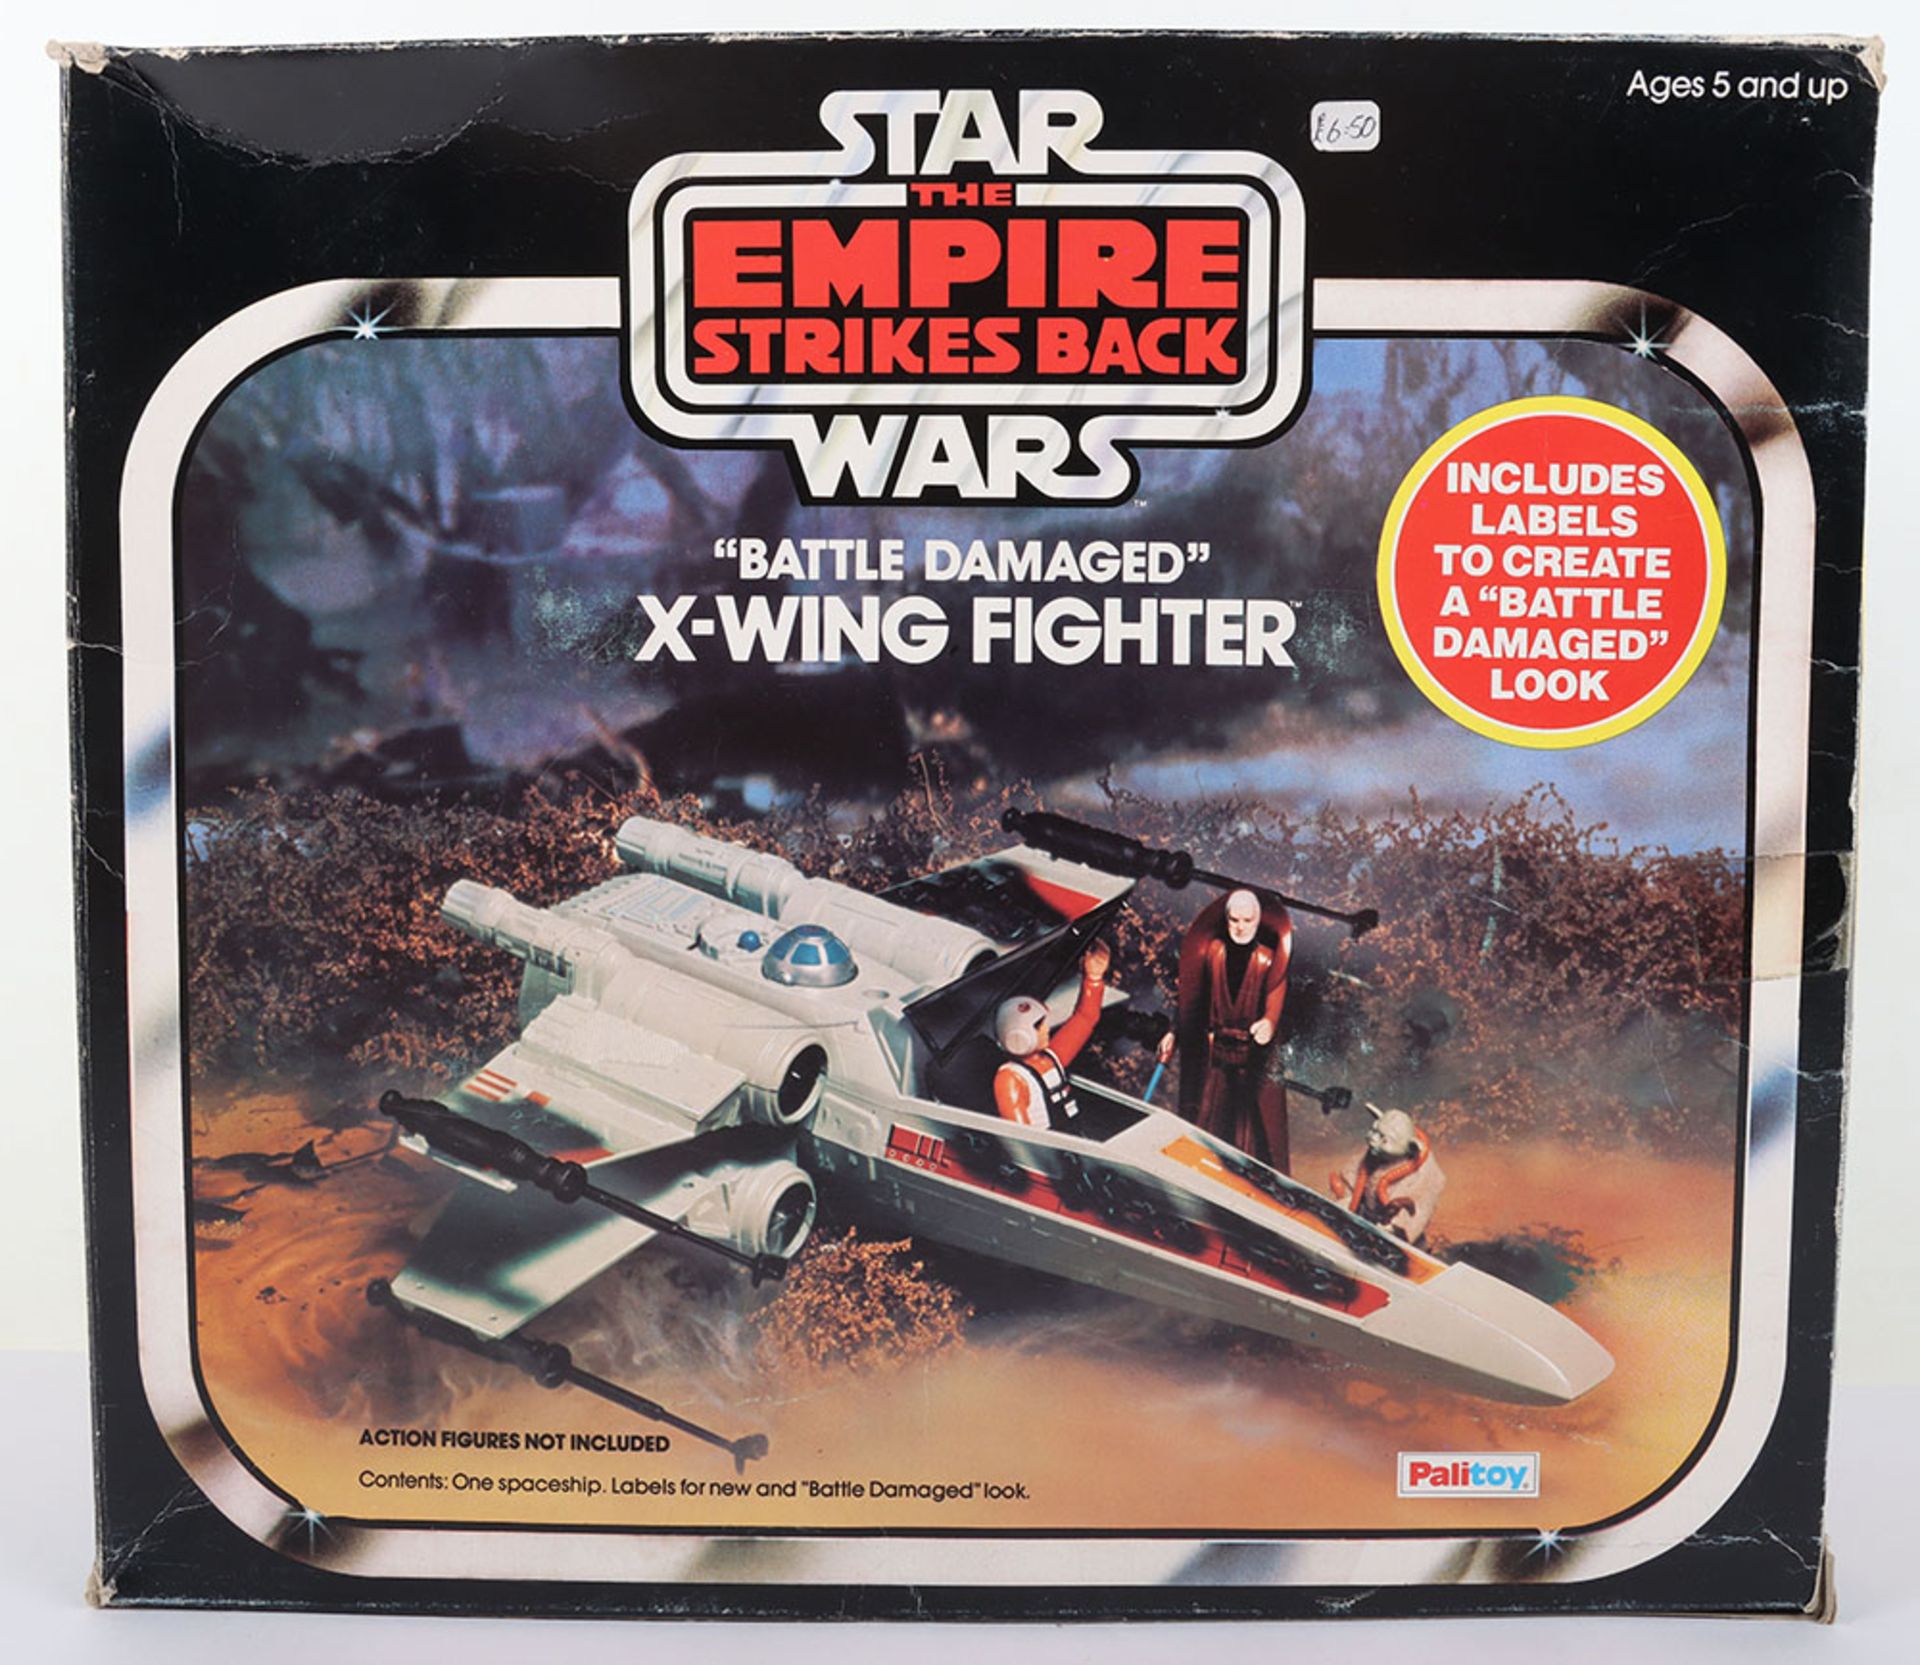 Boxed Vintage Palitoy Star Wars The Empire Strikes Back Battle Damaged X-Wing Fighter - Image 5 of 8